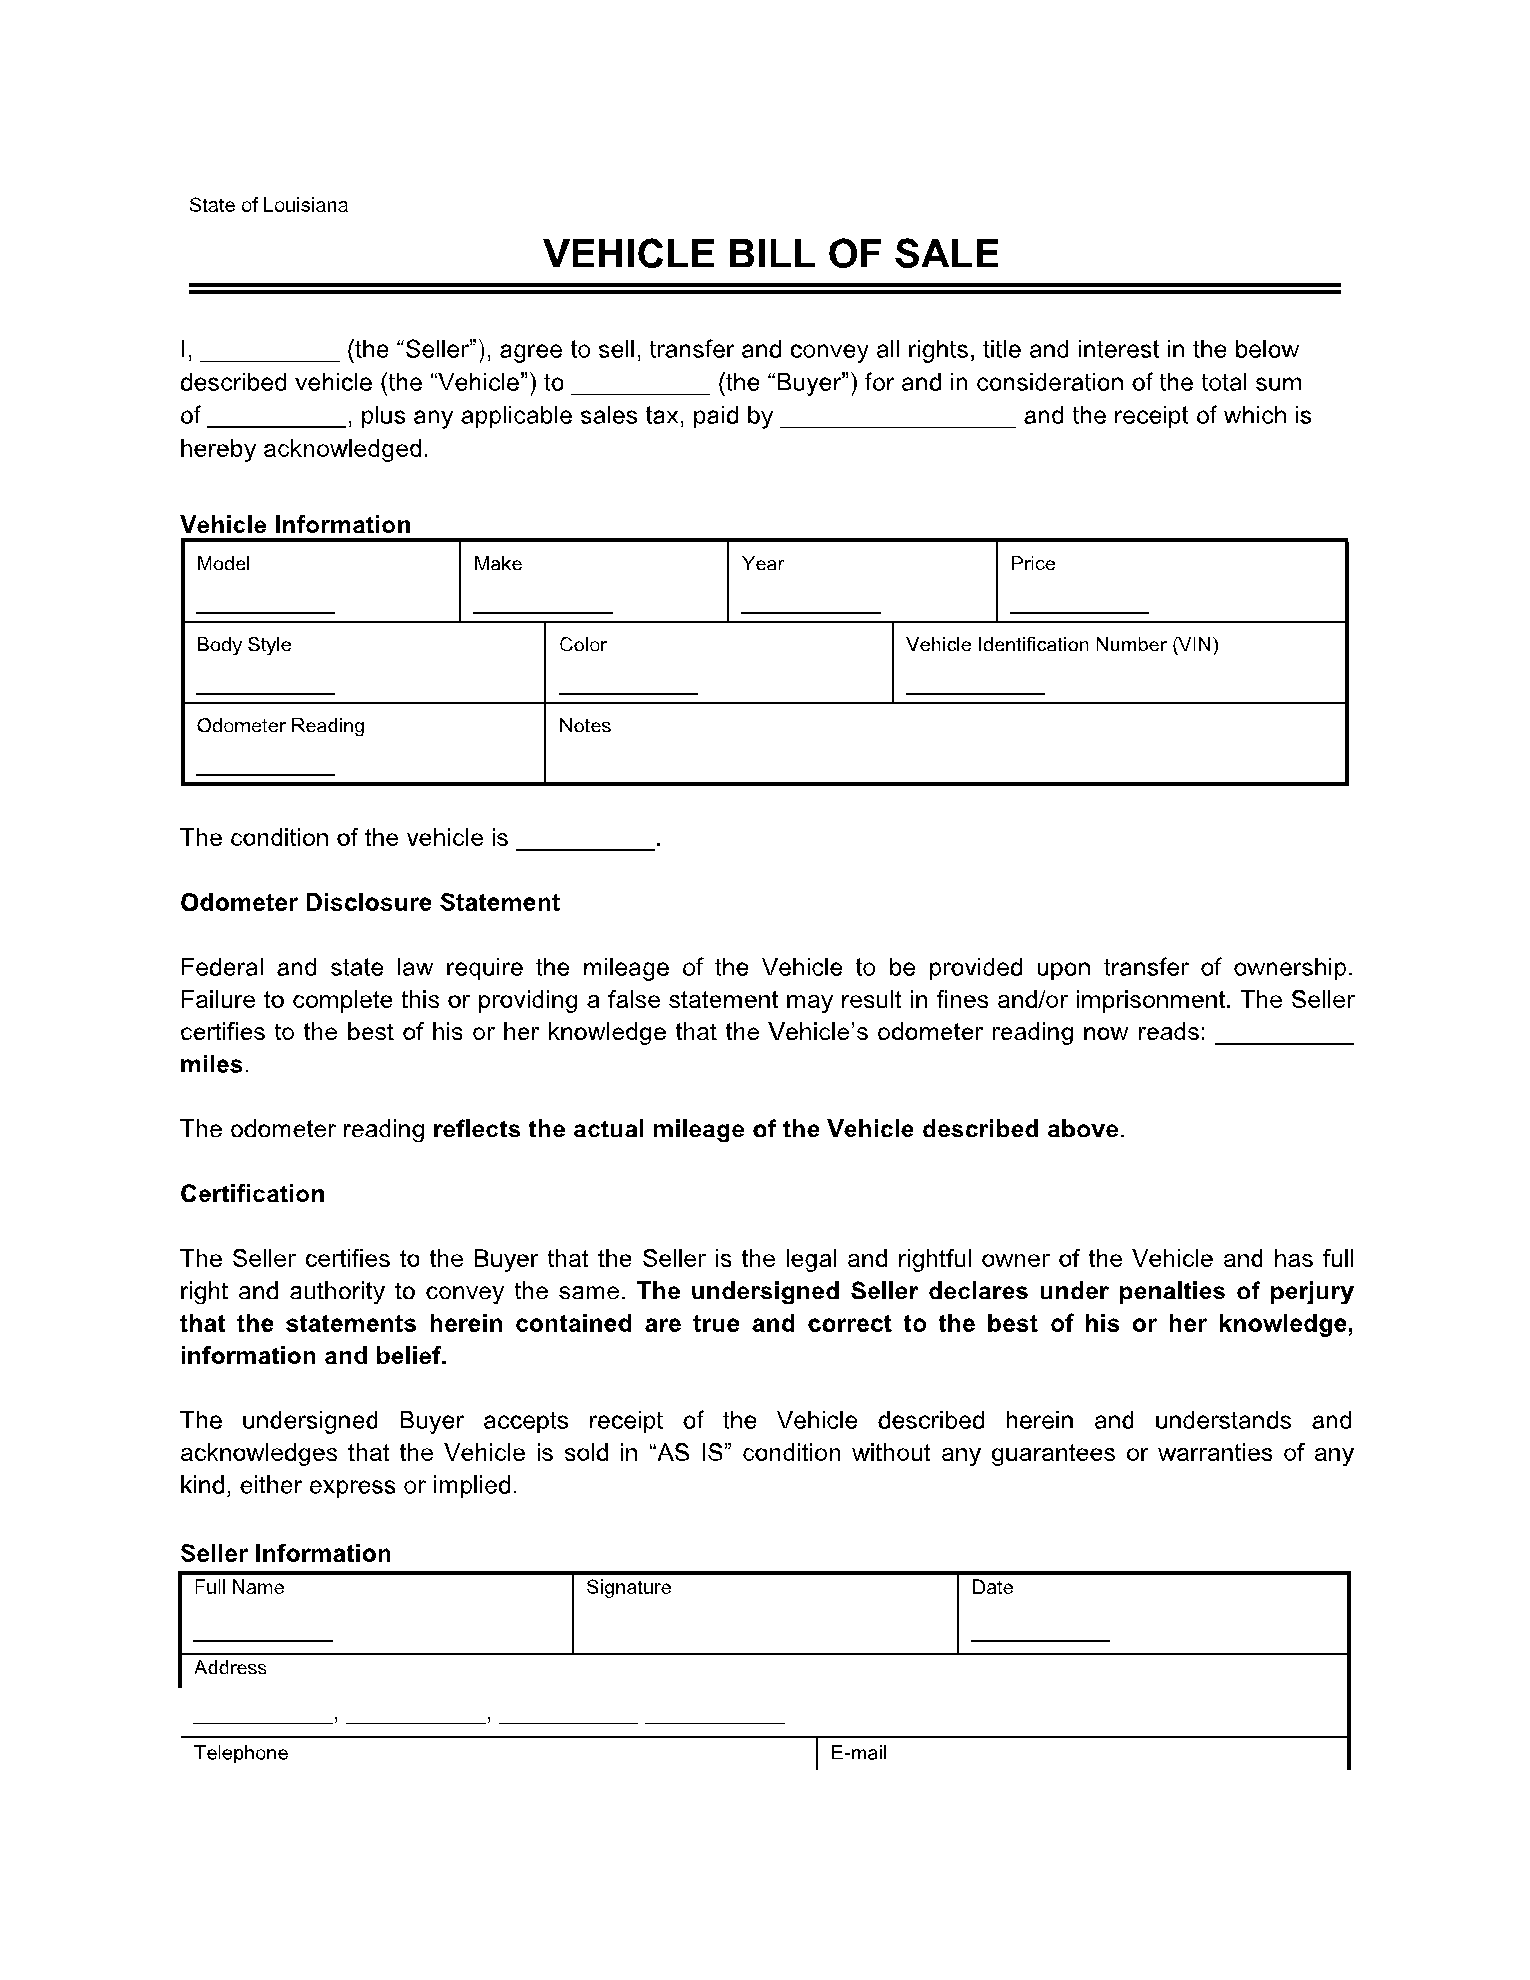 Vehicle Bill of Sale Forms in Louisiana